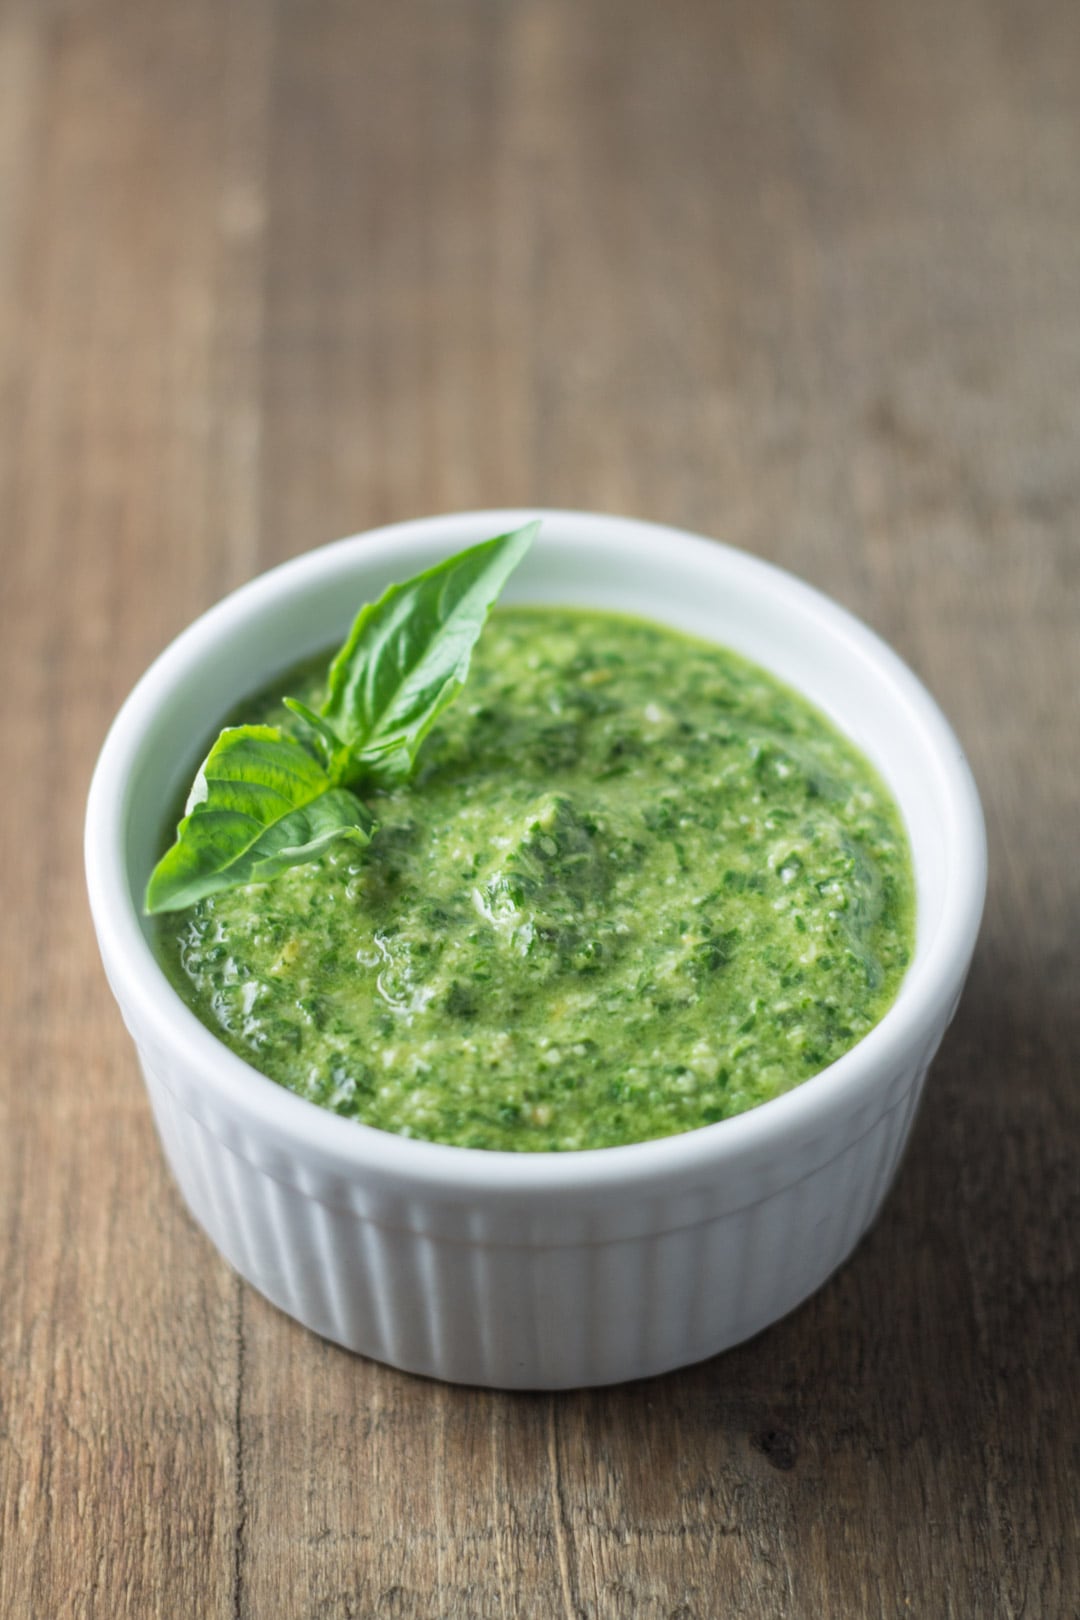 A small bowl filled with homemade pesto and garnished with a couple of basil leaves.